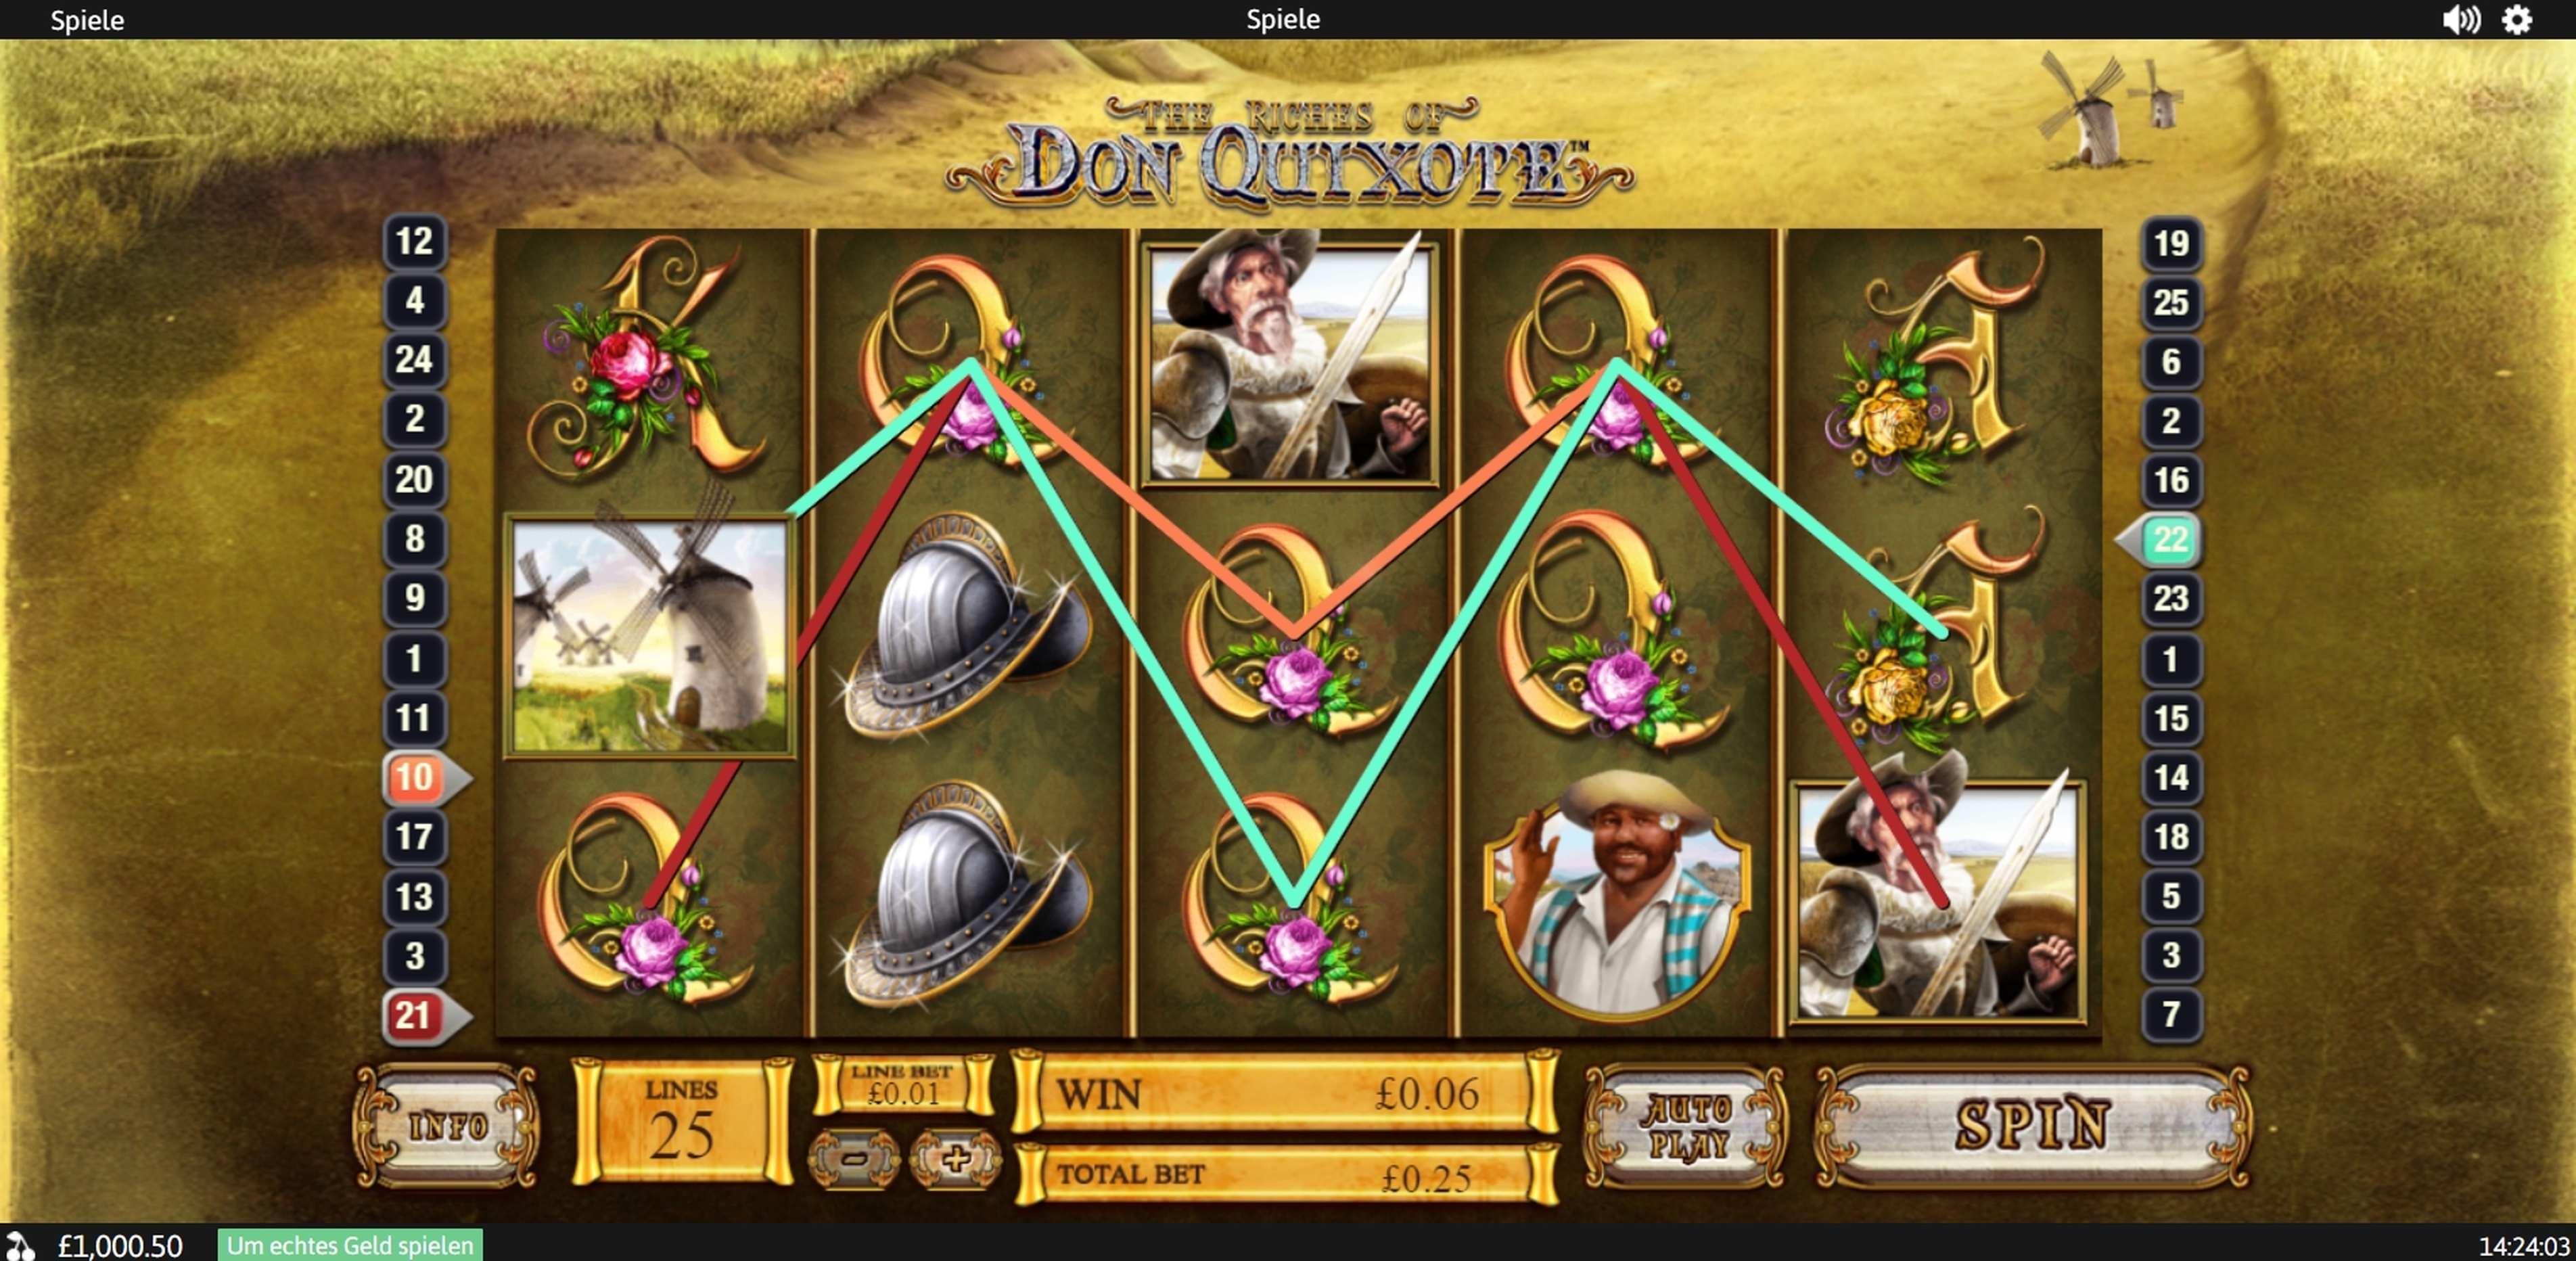 Win Money in The Riches of Don Quixote Free Slot Game by Playtech